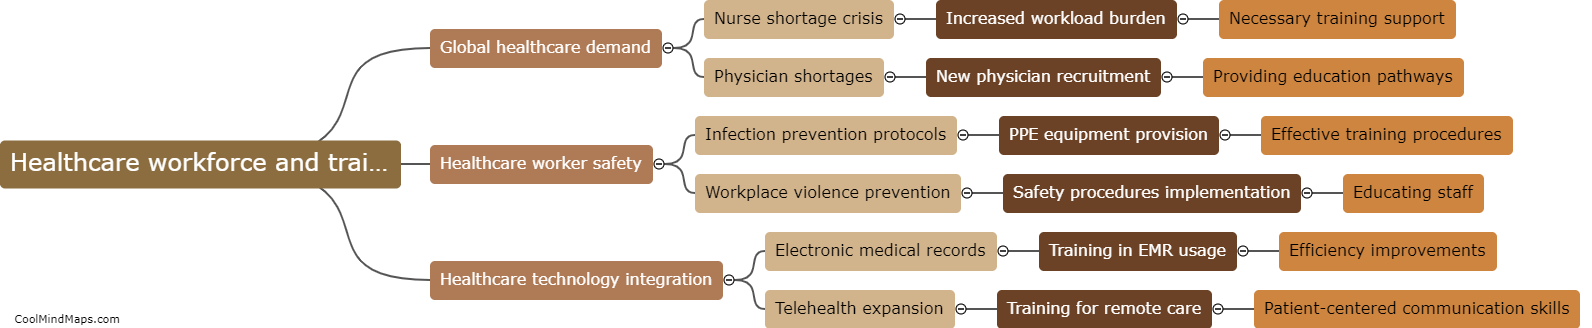 Healthcare workforce and training